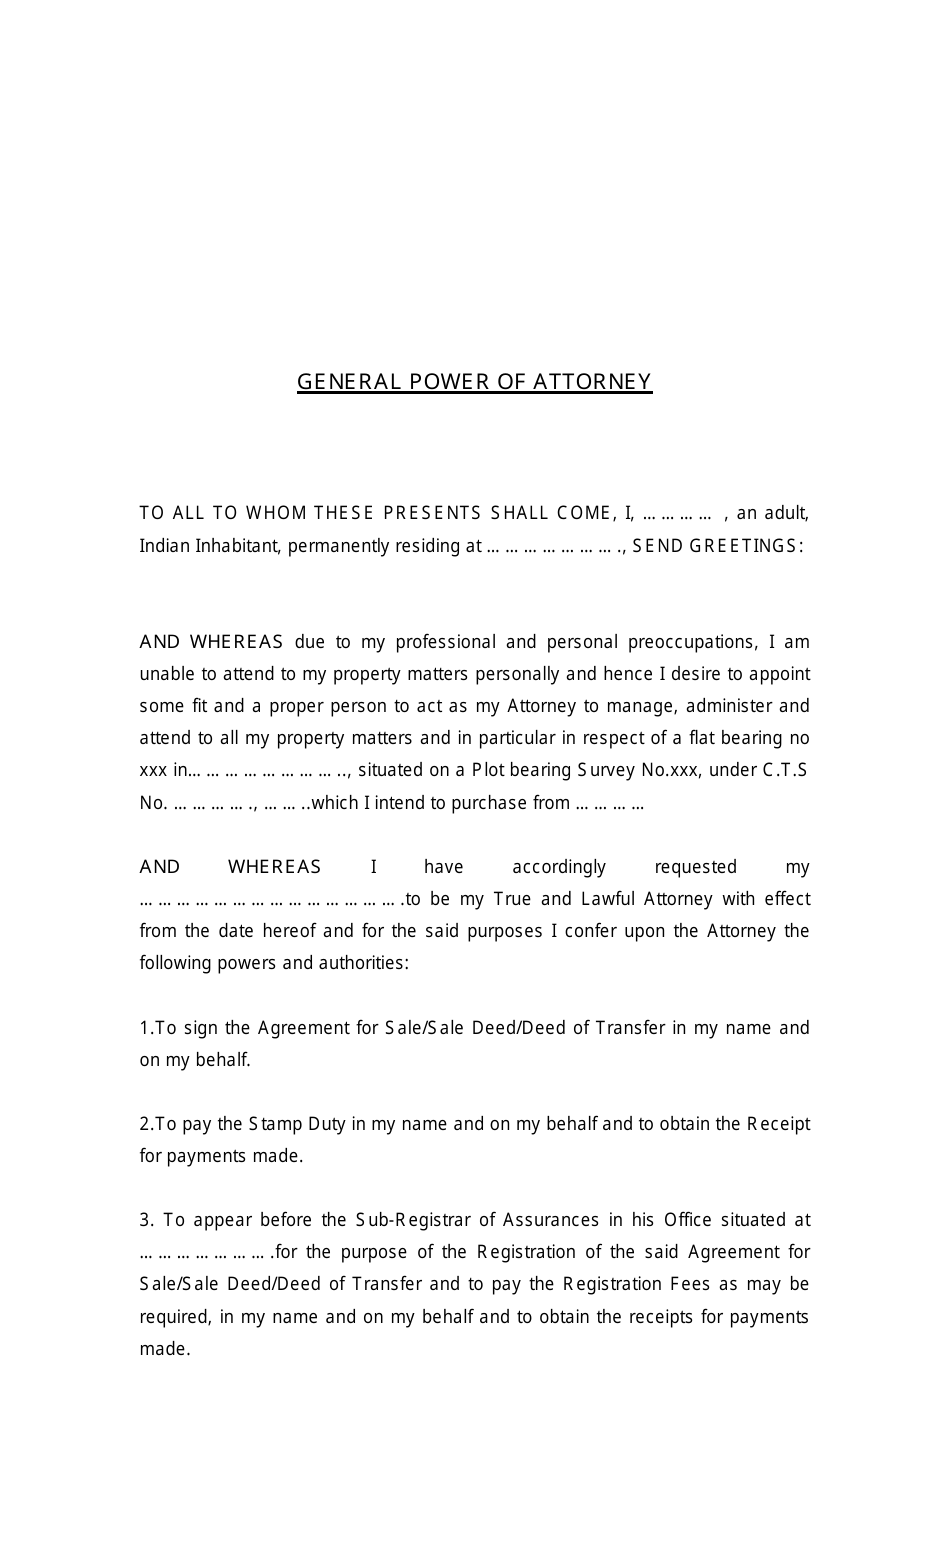 General Power of Attorney Form - Indian Inhabitant, Page 1